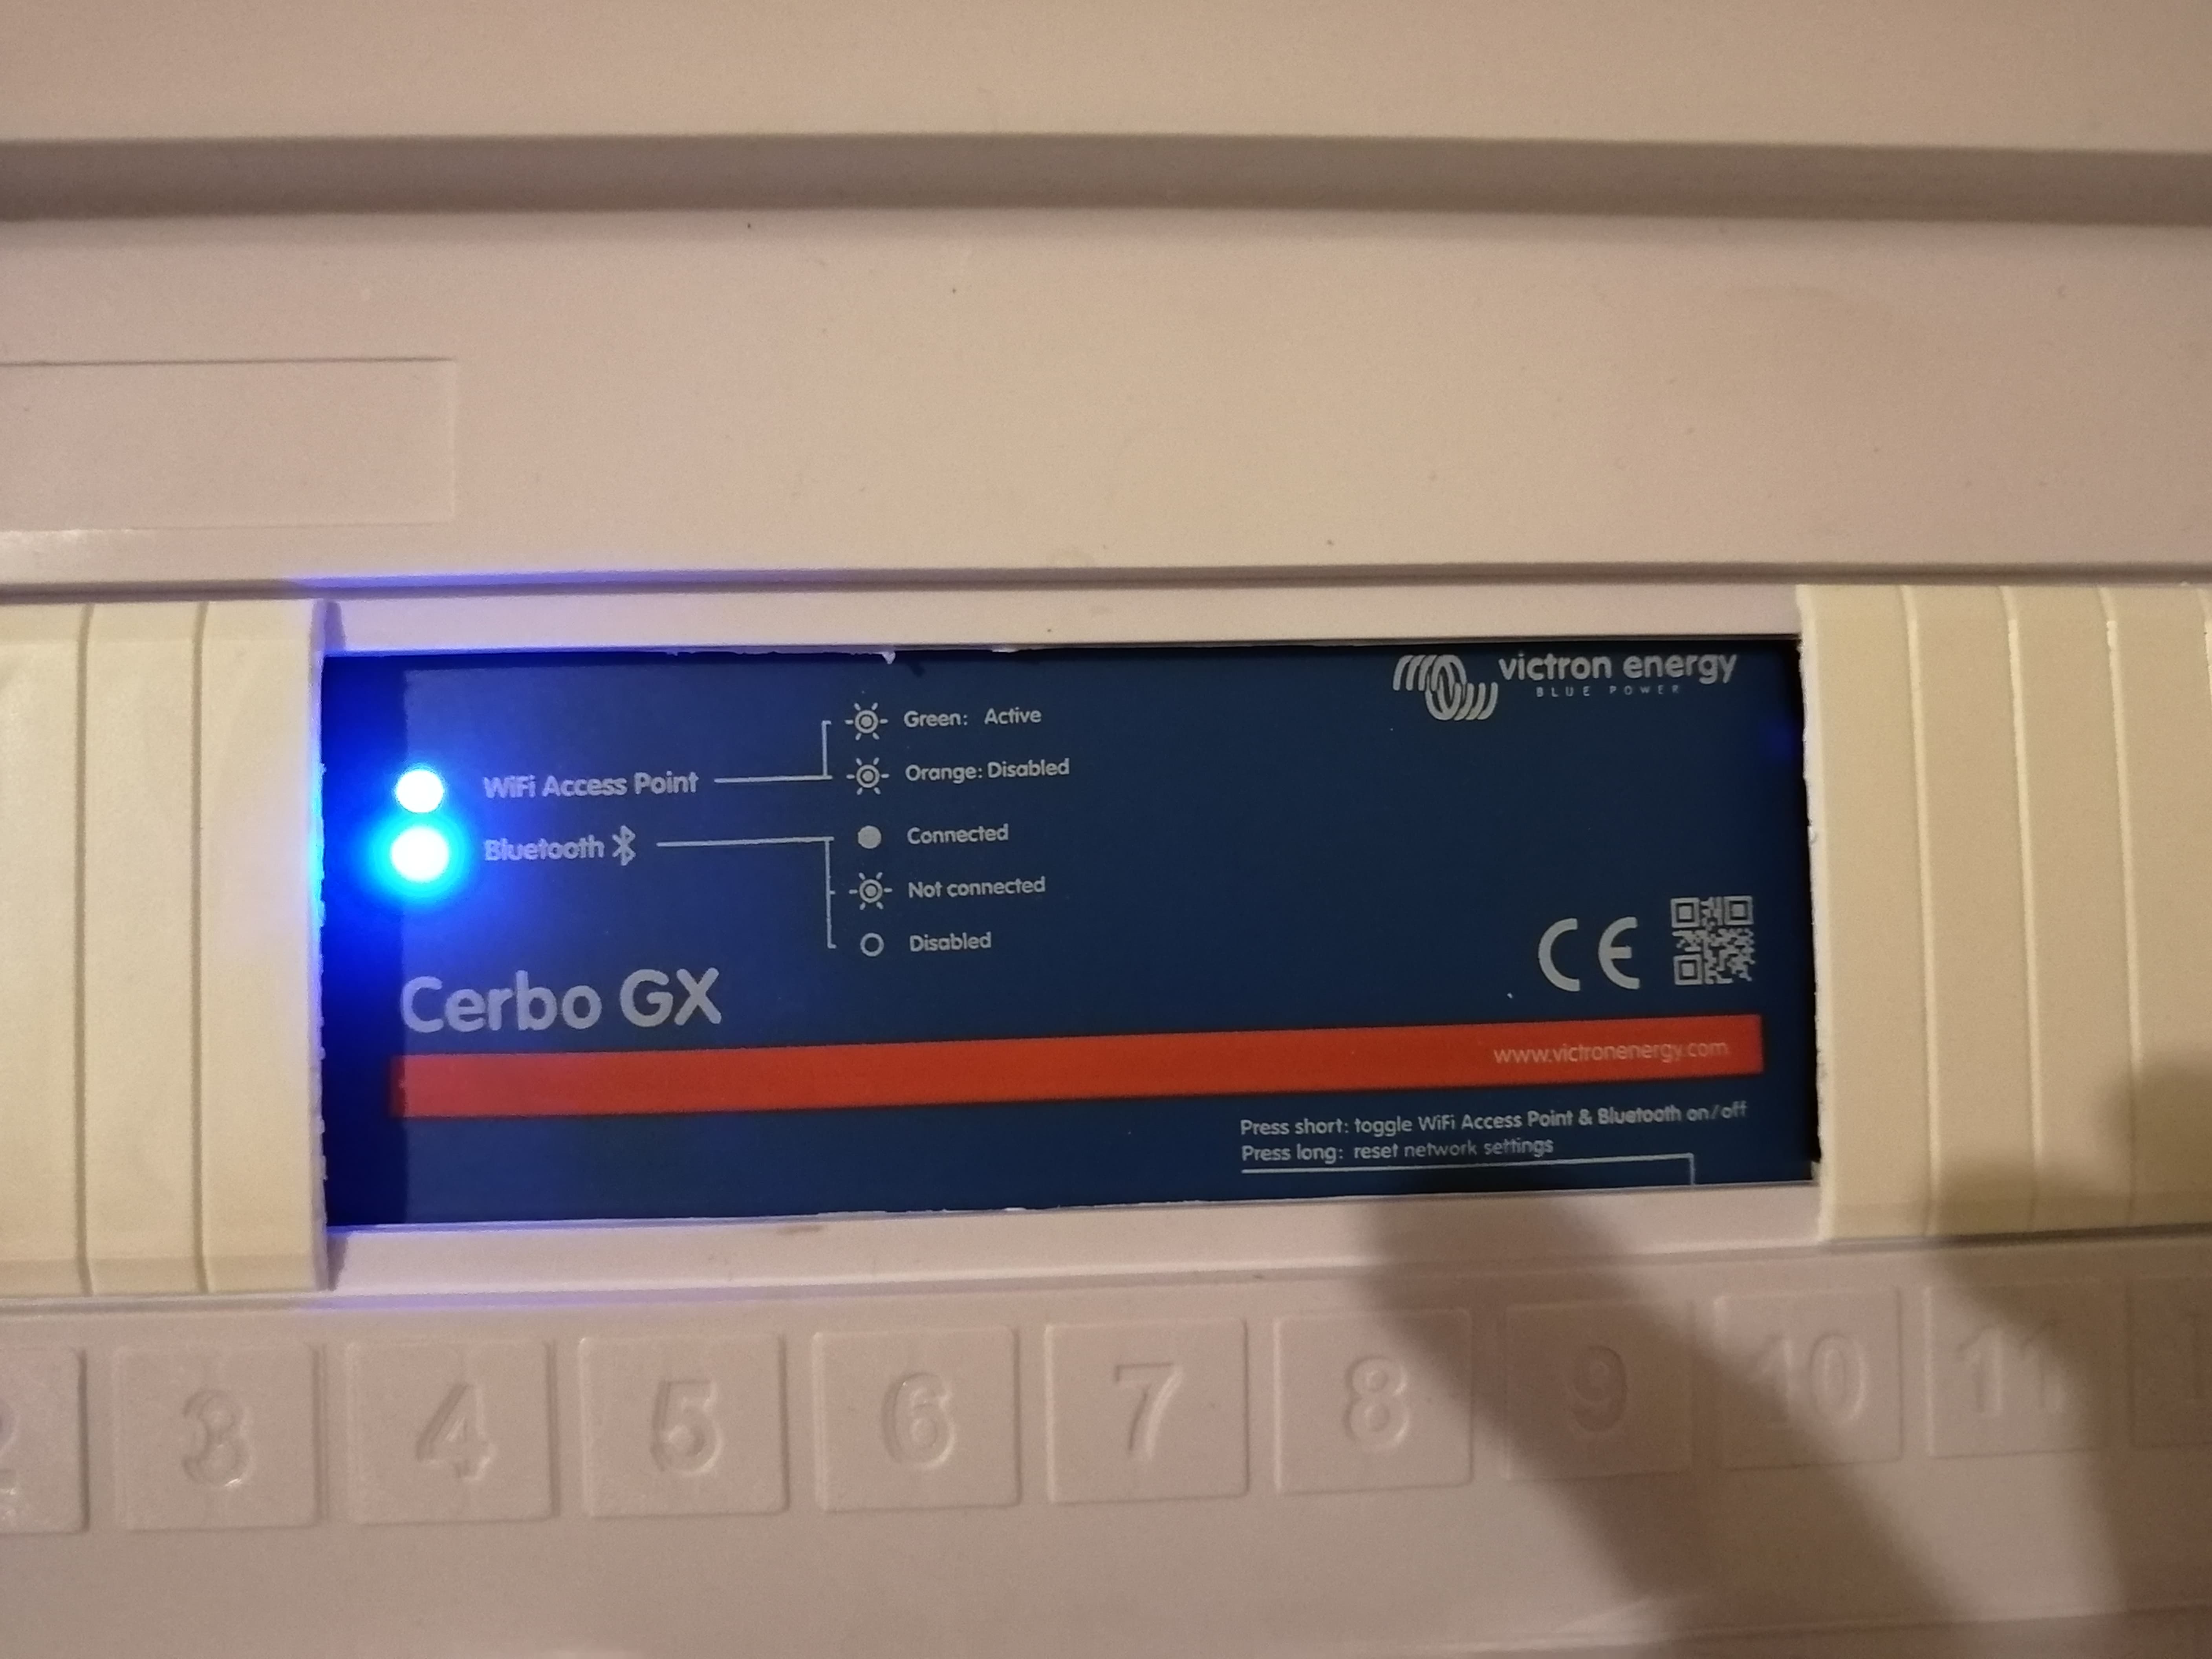 Setting up your Cerbo GX to work on the Victron VRM